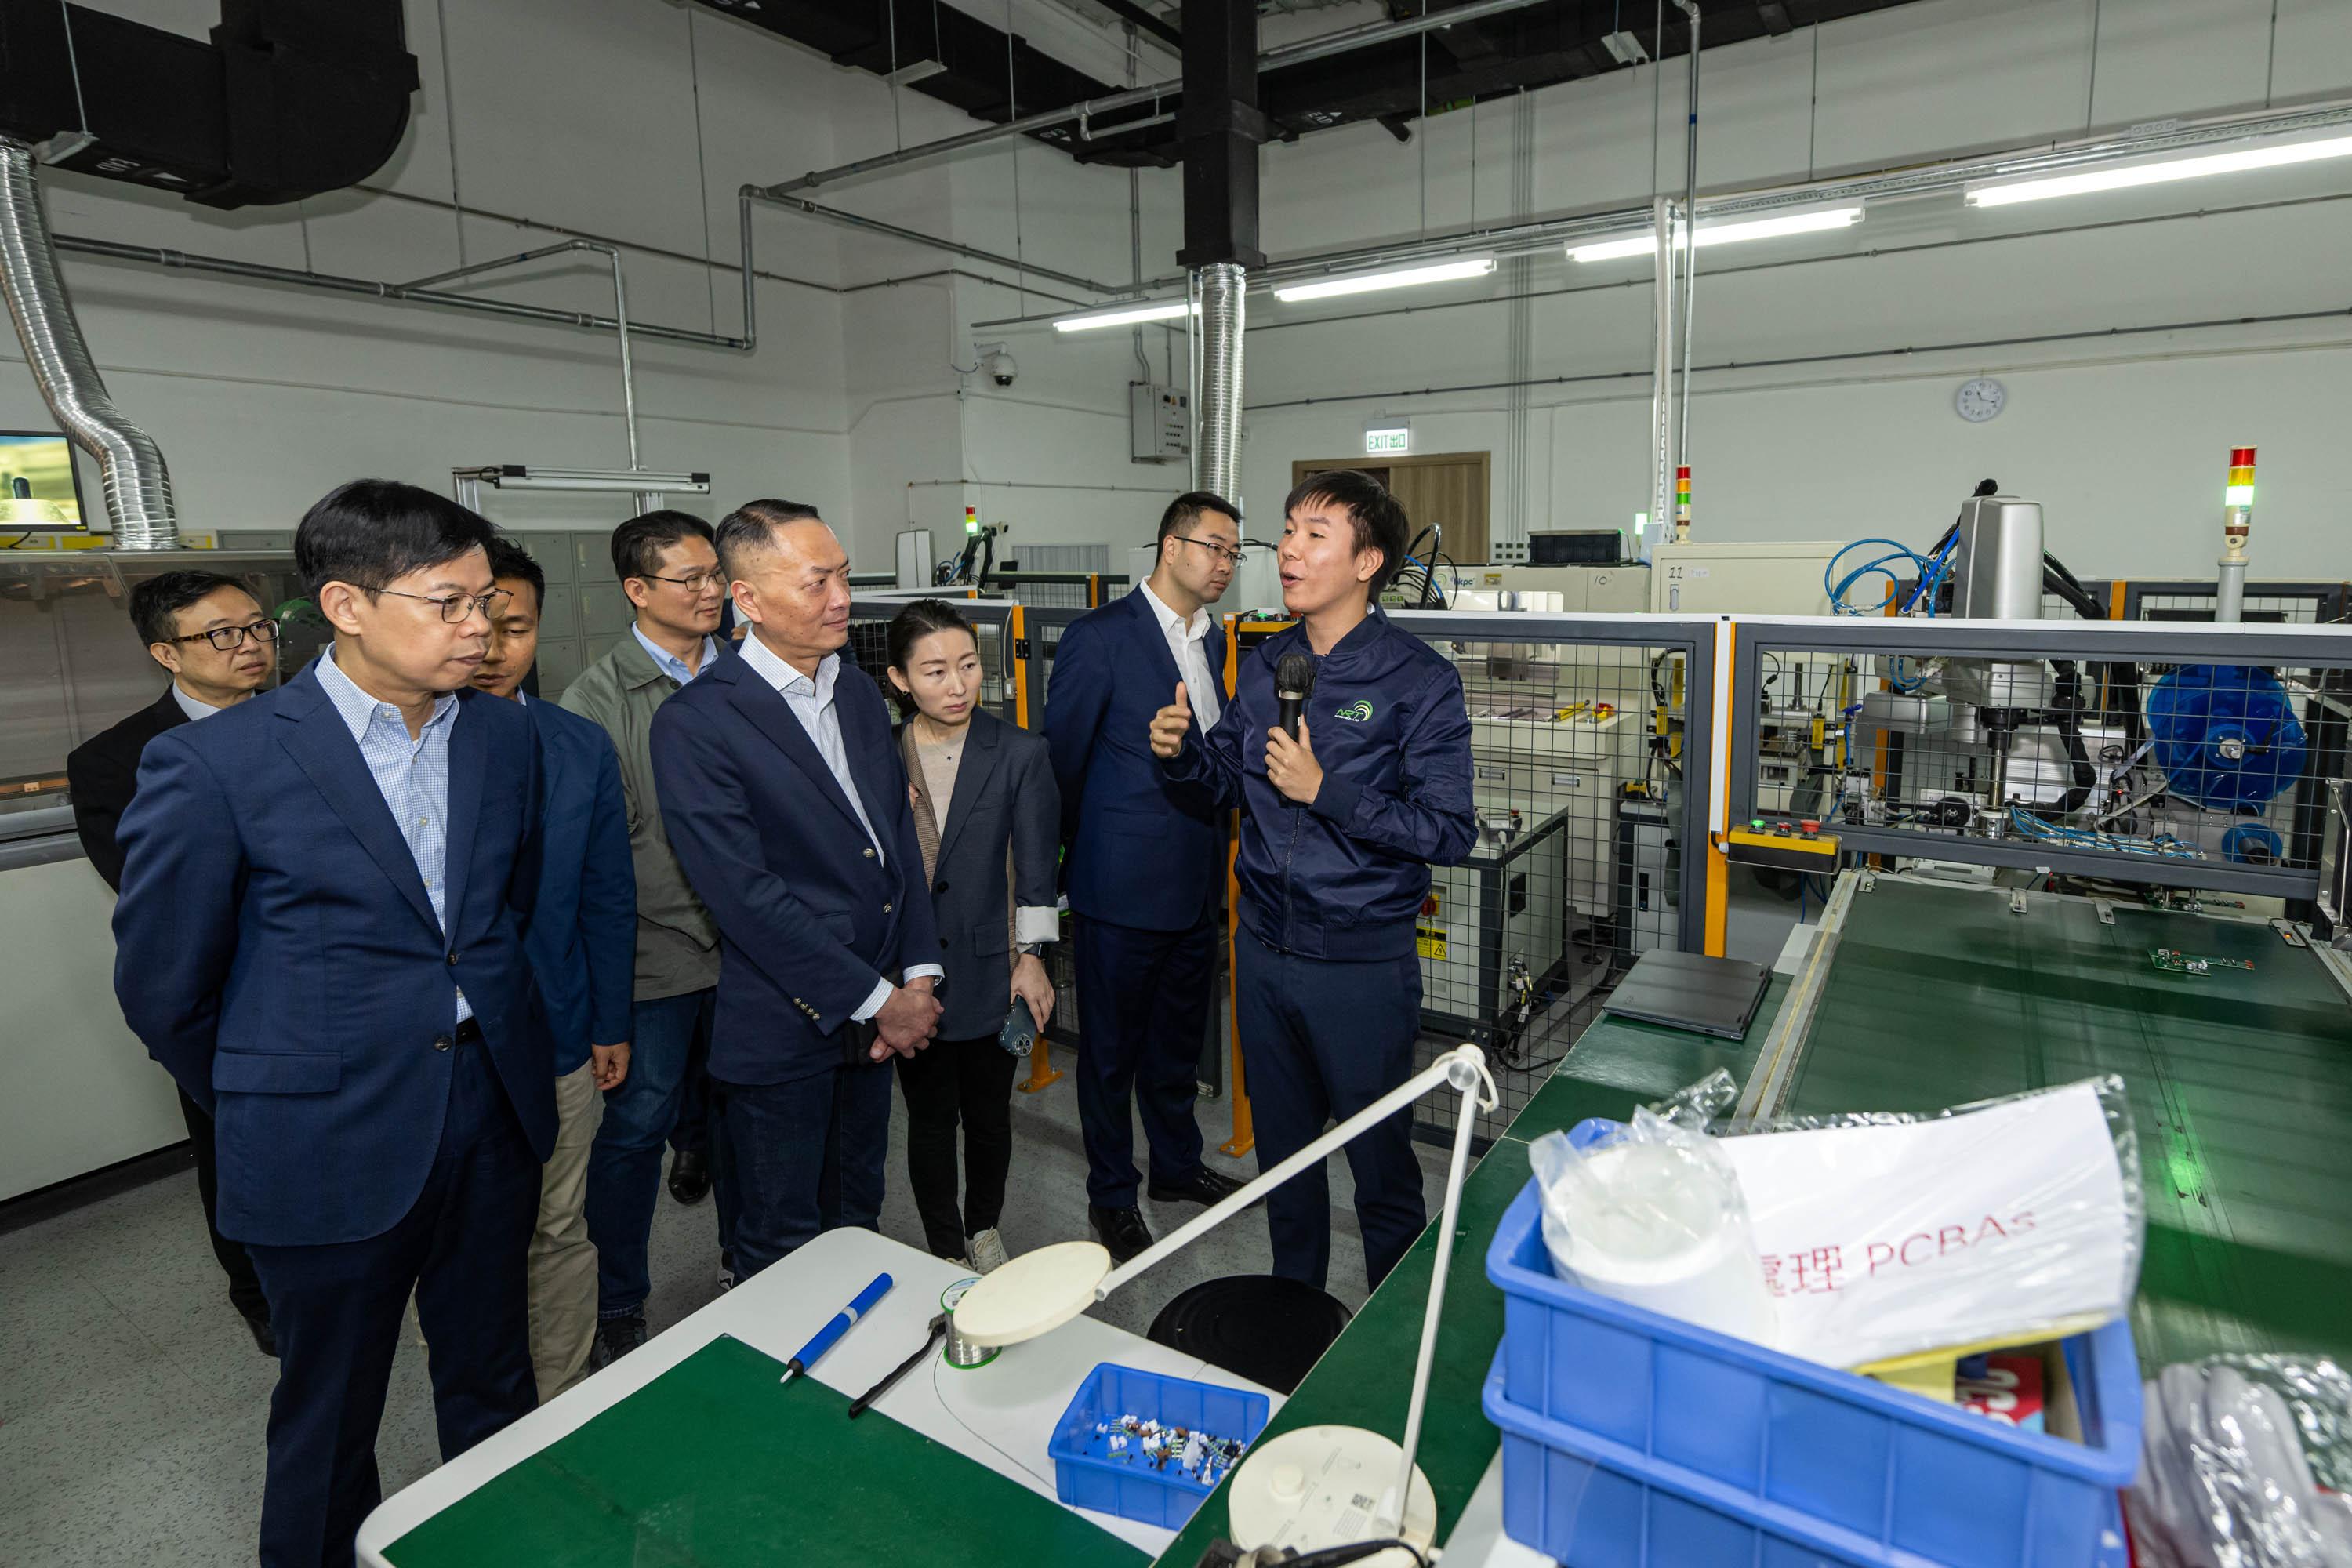 The Legislative Council Subcommittee on Matters Relating to the Promotion of New Industrialzation visited the Advanced Manufacturing Centre (AMC) at the Tsueng Kwan O InnoPark today (November 14). Photo shows Members visiting one of the enterprises at the AMC.